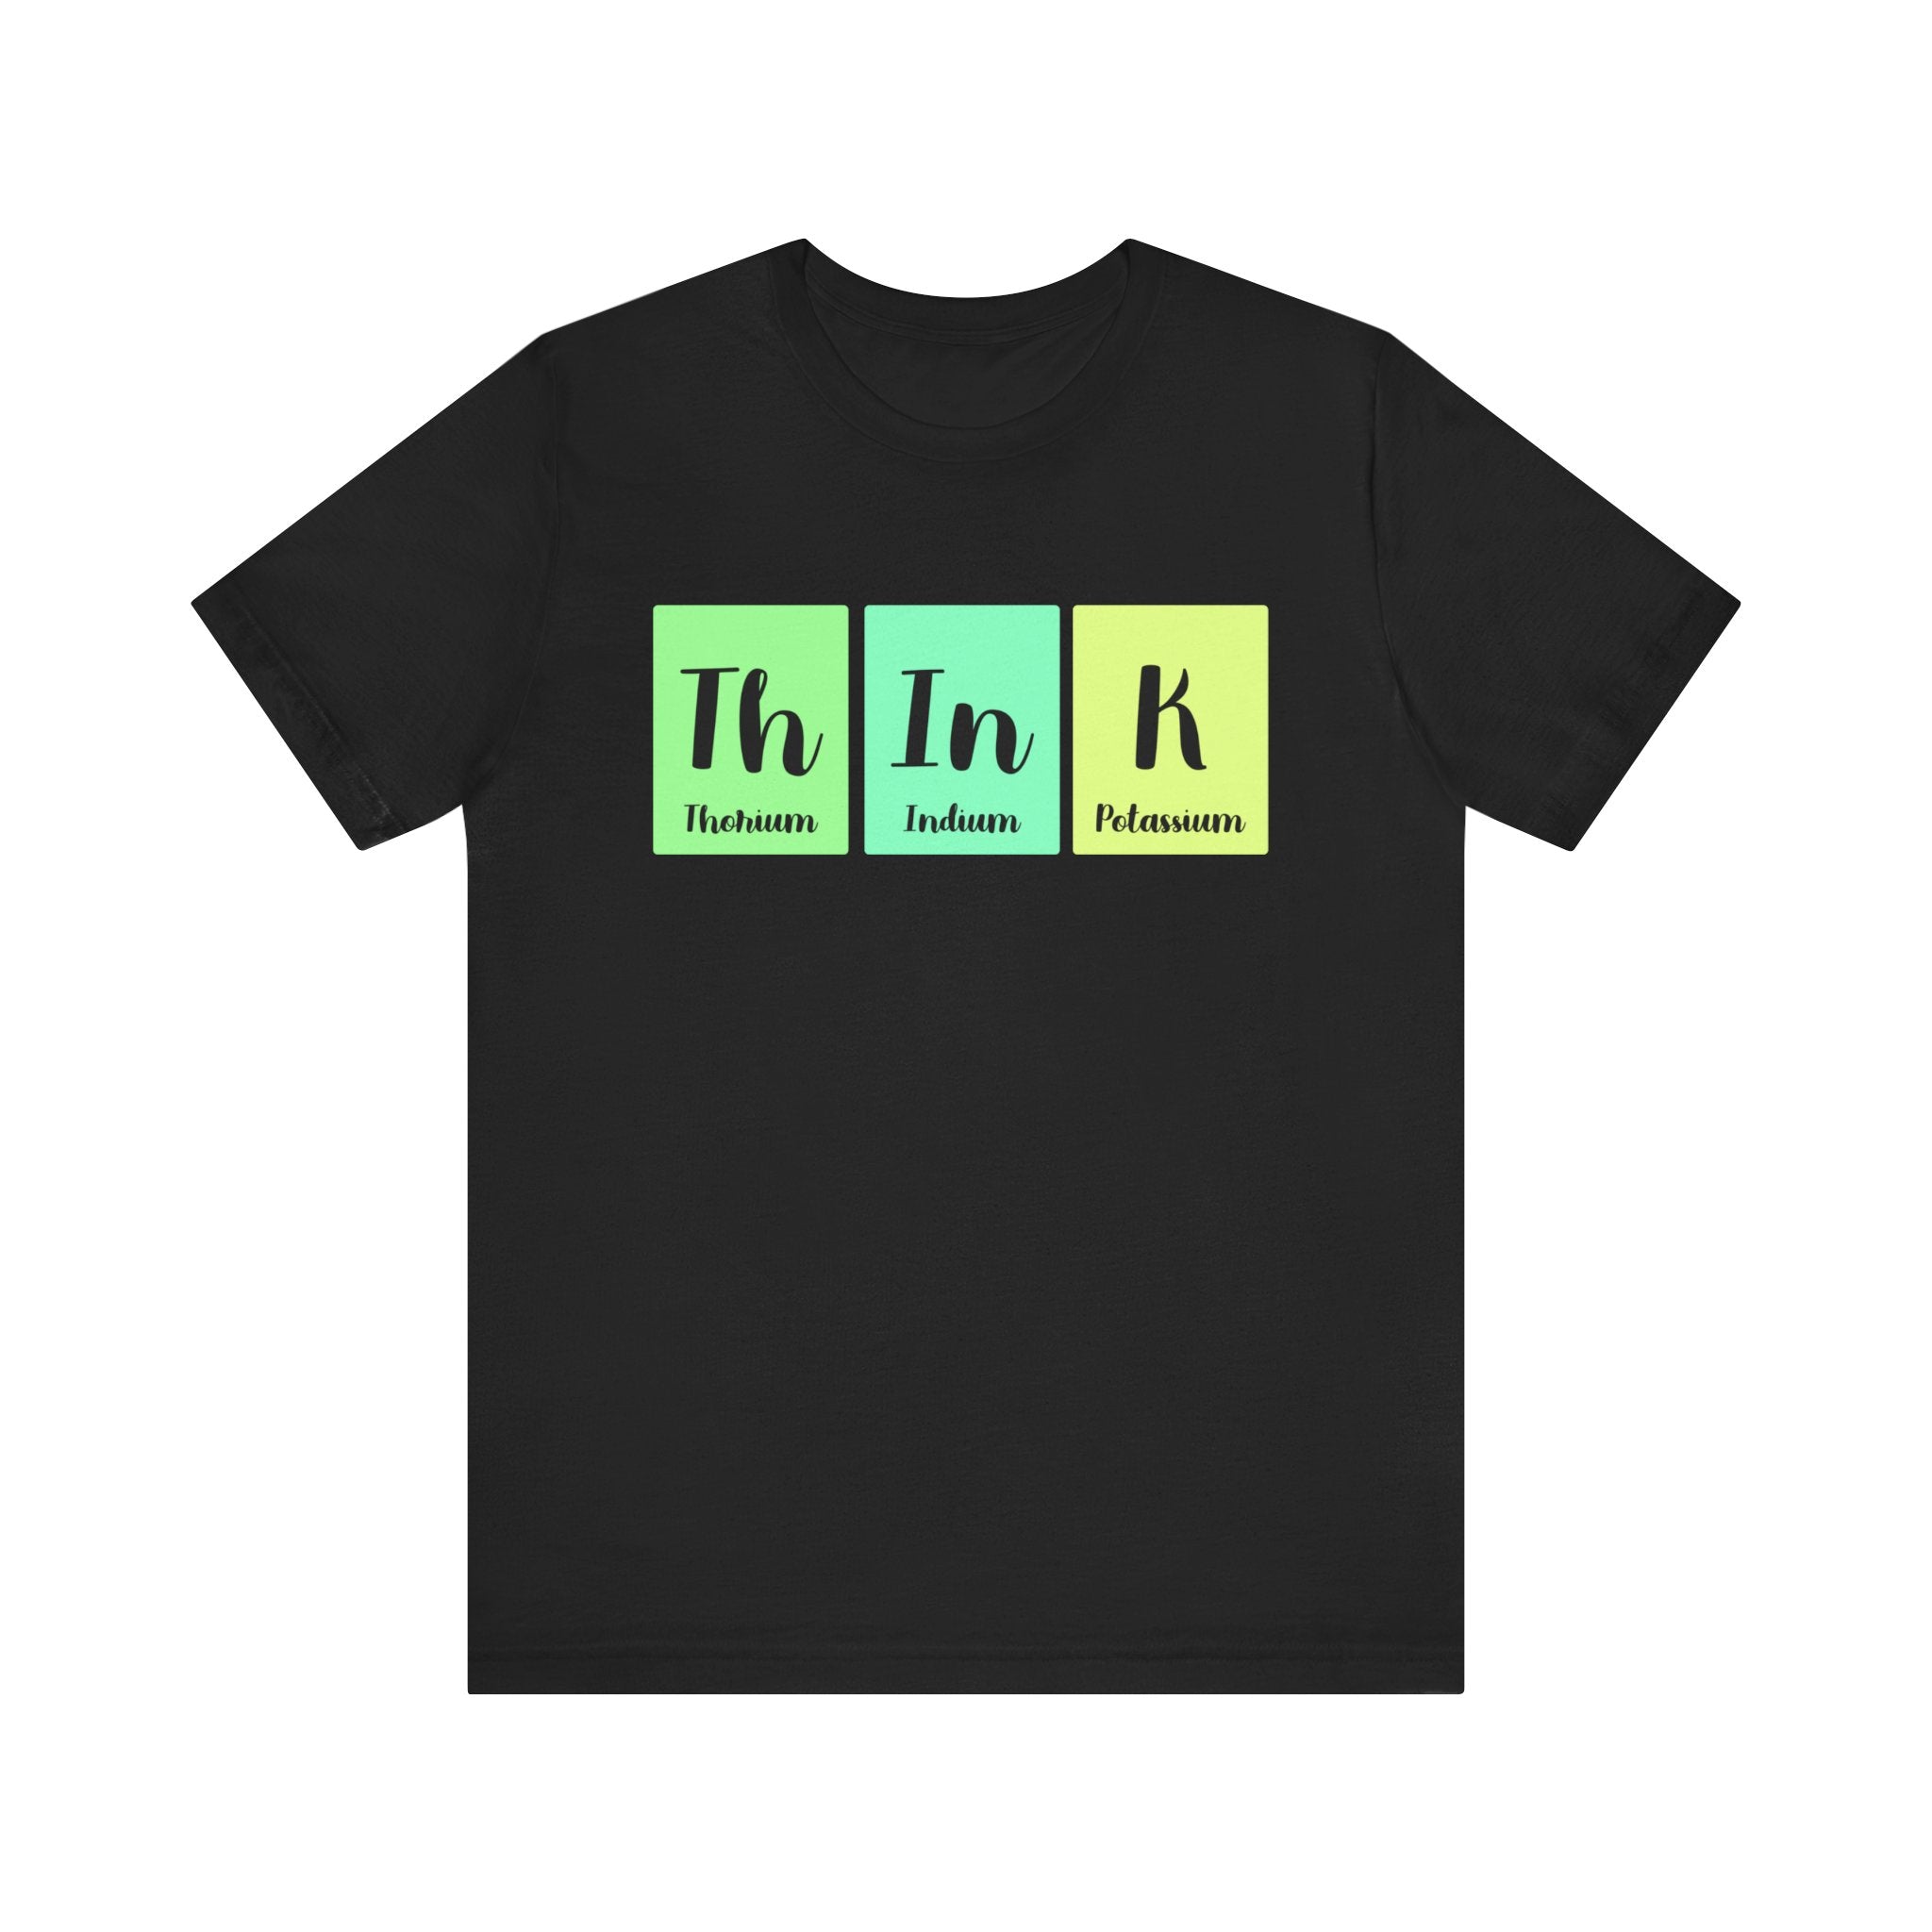 Unisex jersey tee with Th-In-K (thorium, indium, potassium) elements in green, yellow, and green squares.